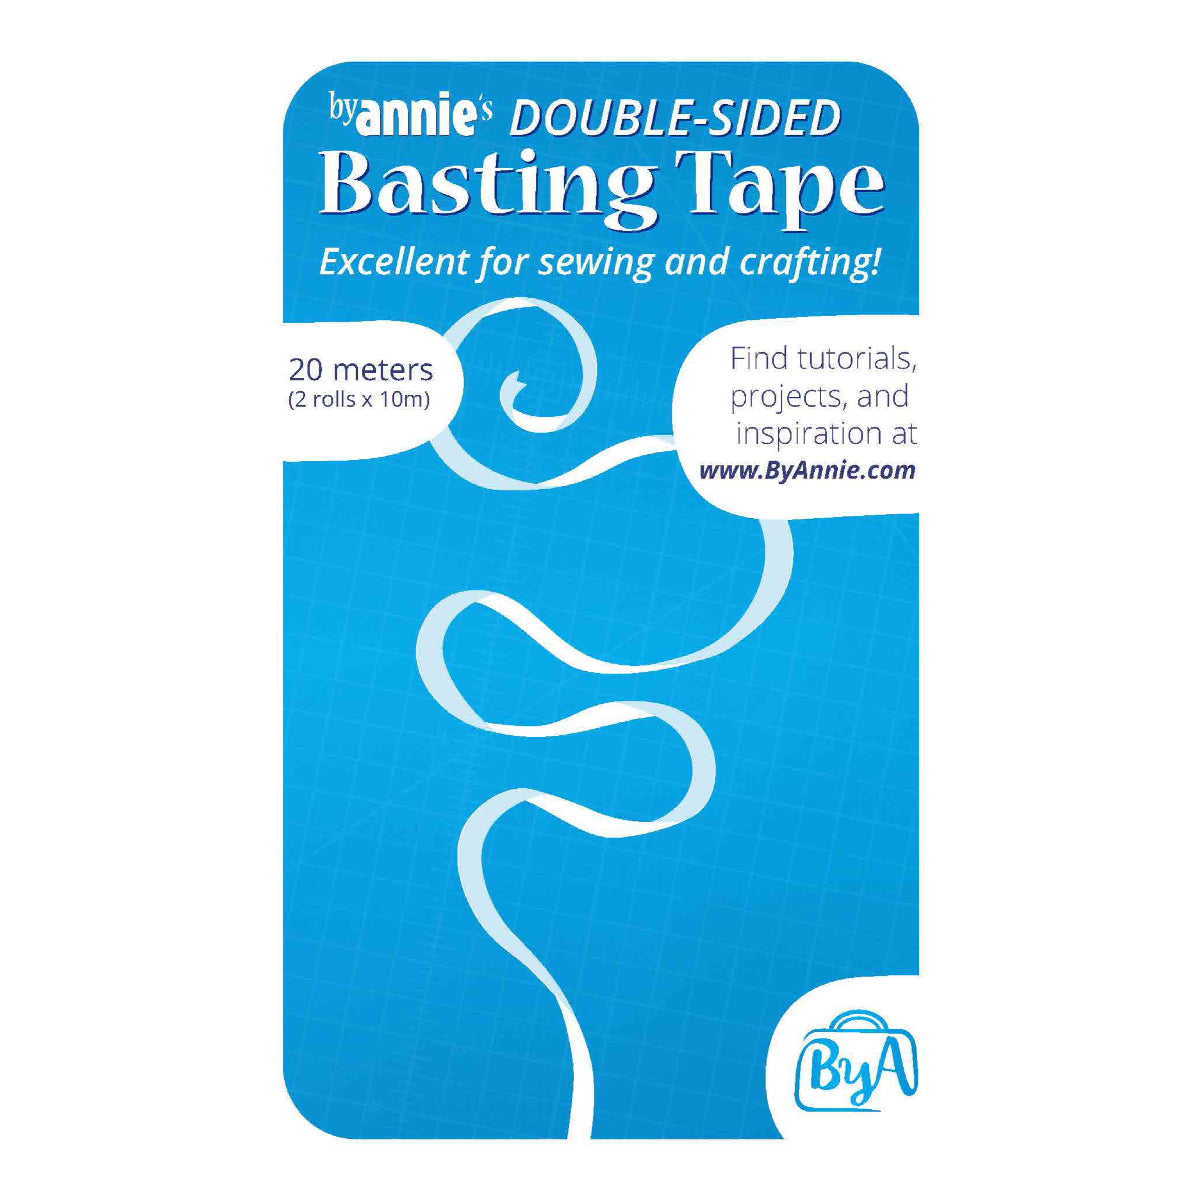 Which Basting Tape Do I Use for My Project?